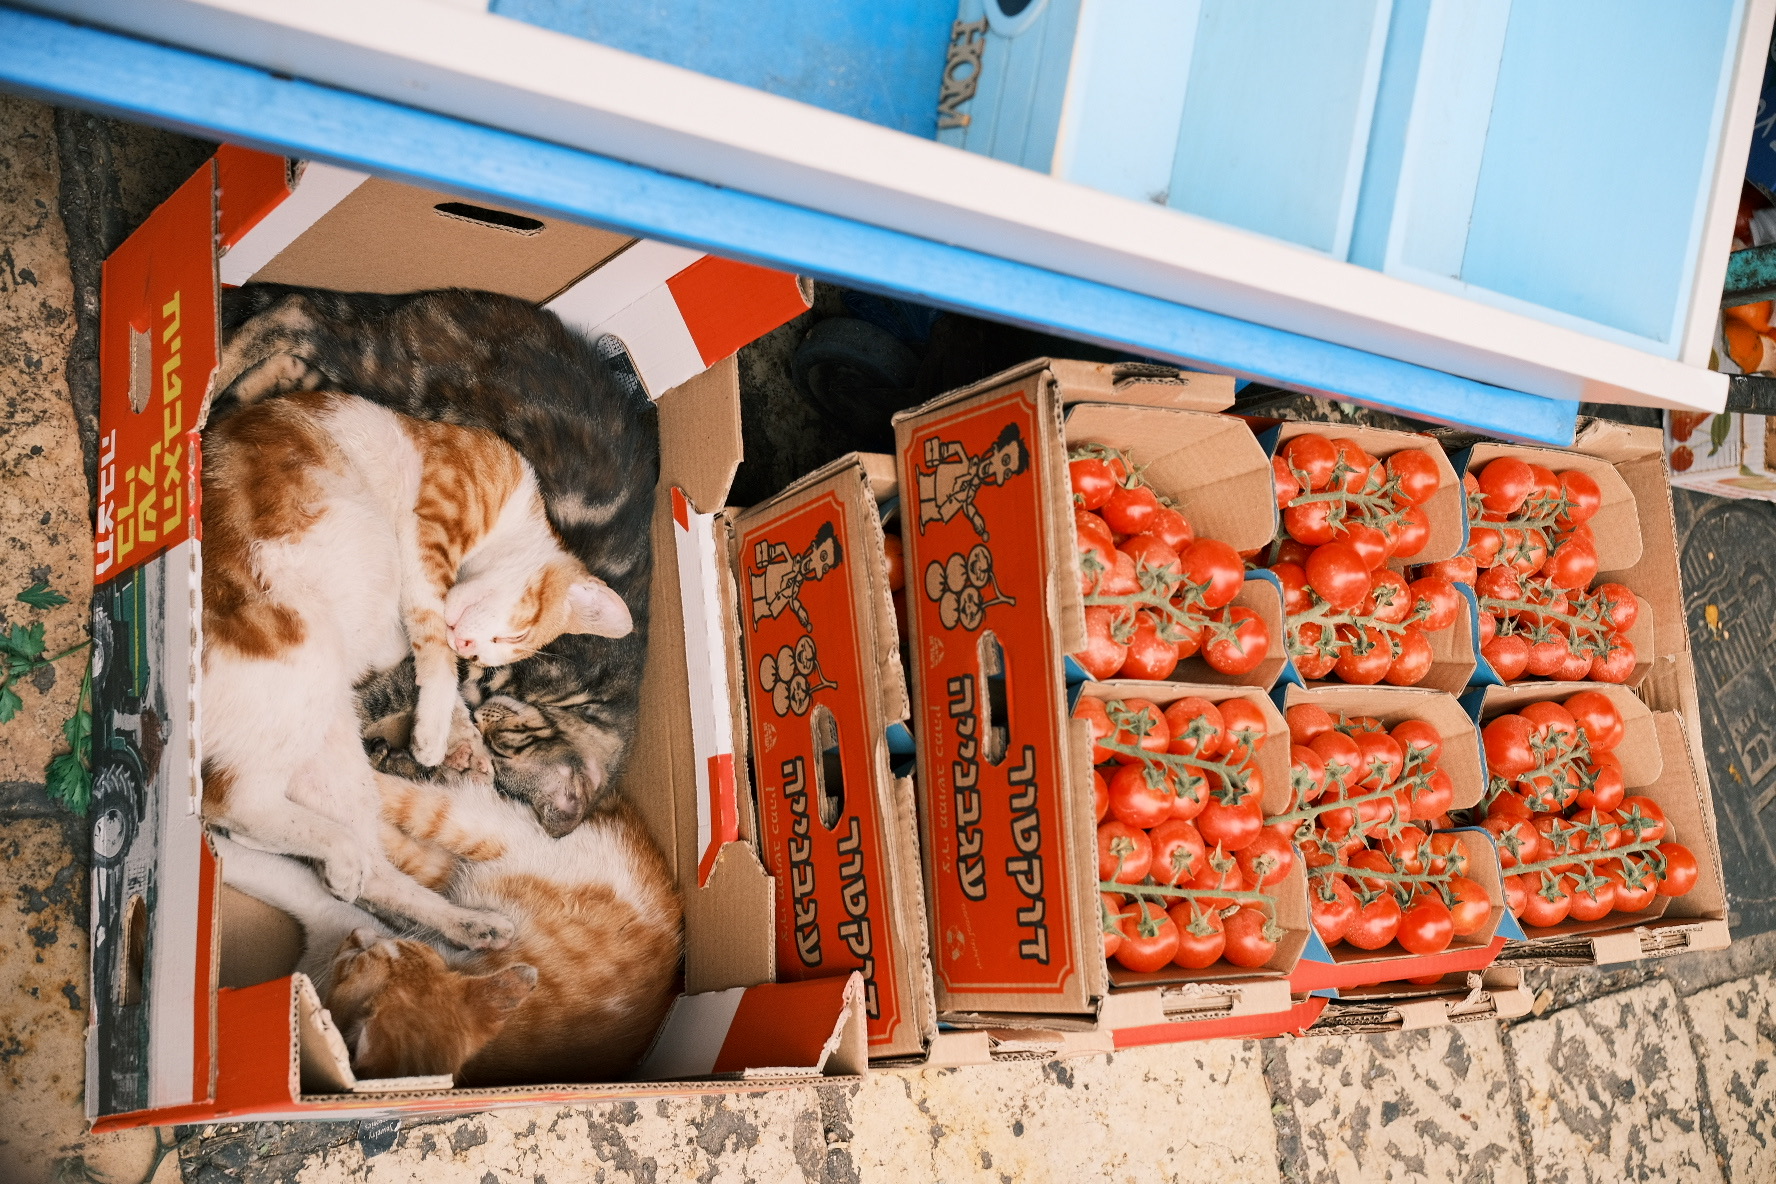 Cats curled up in a box of tomatoes